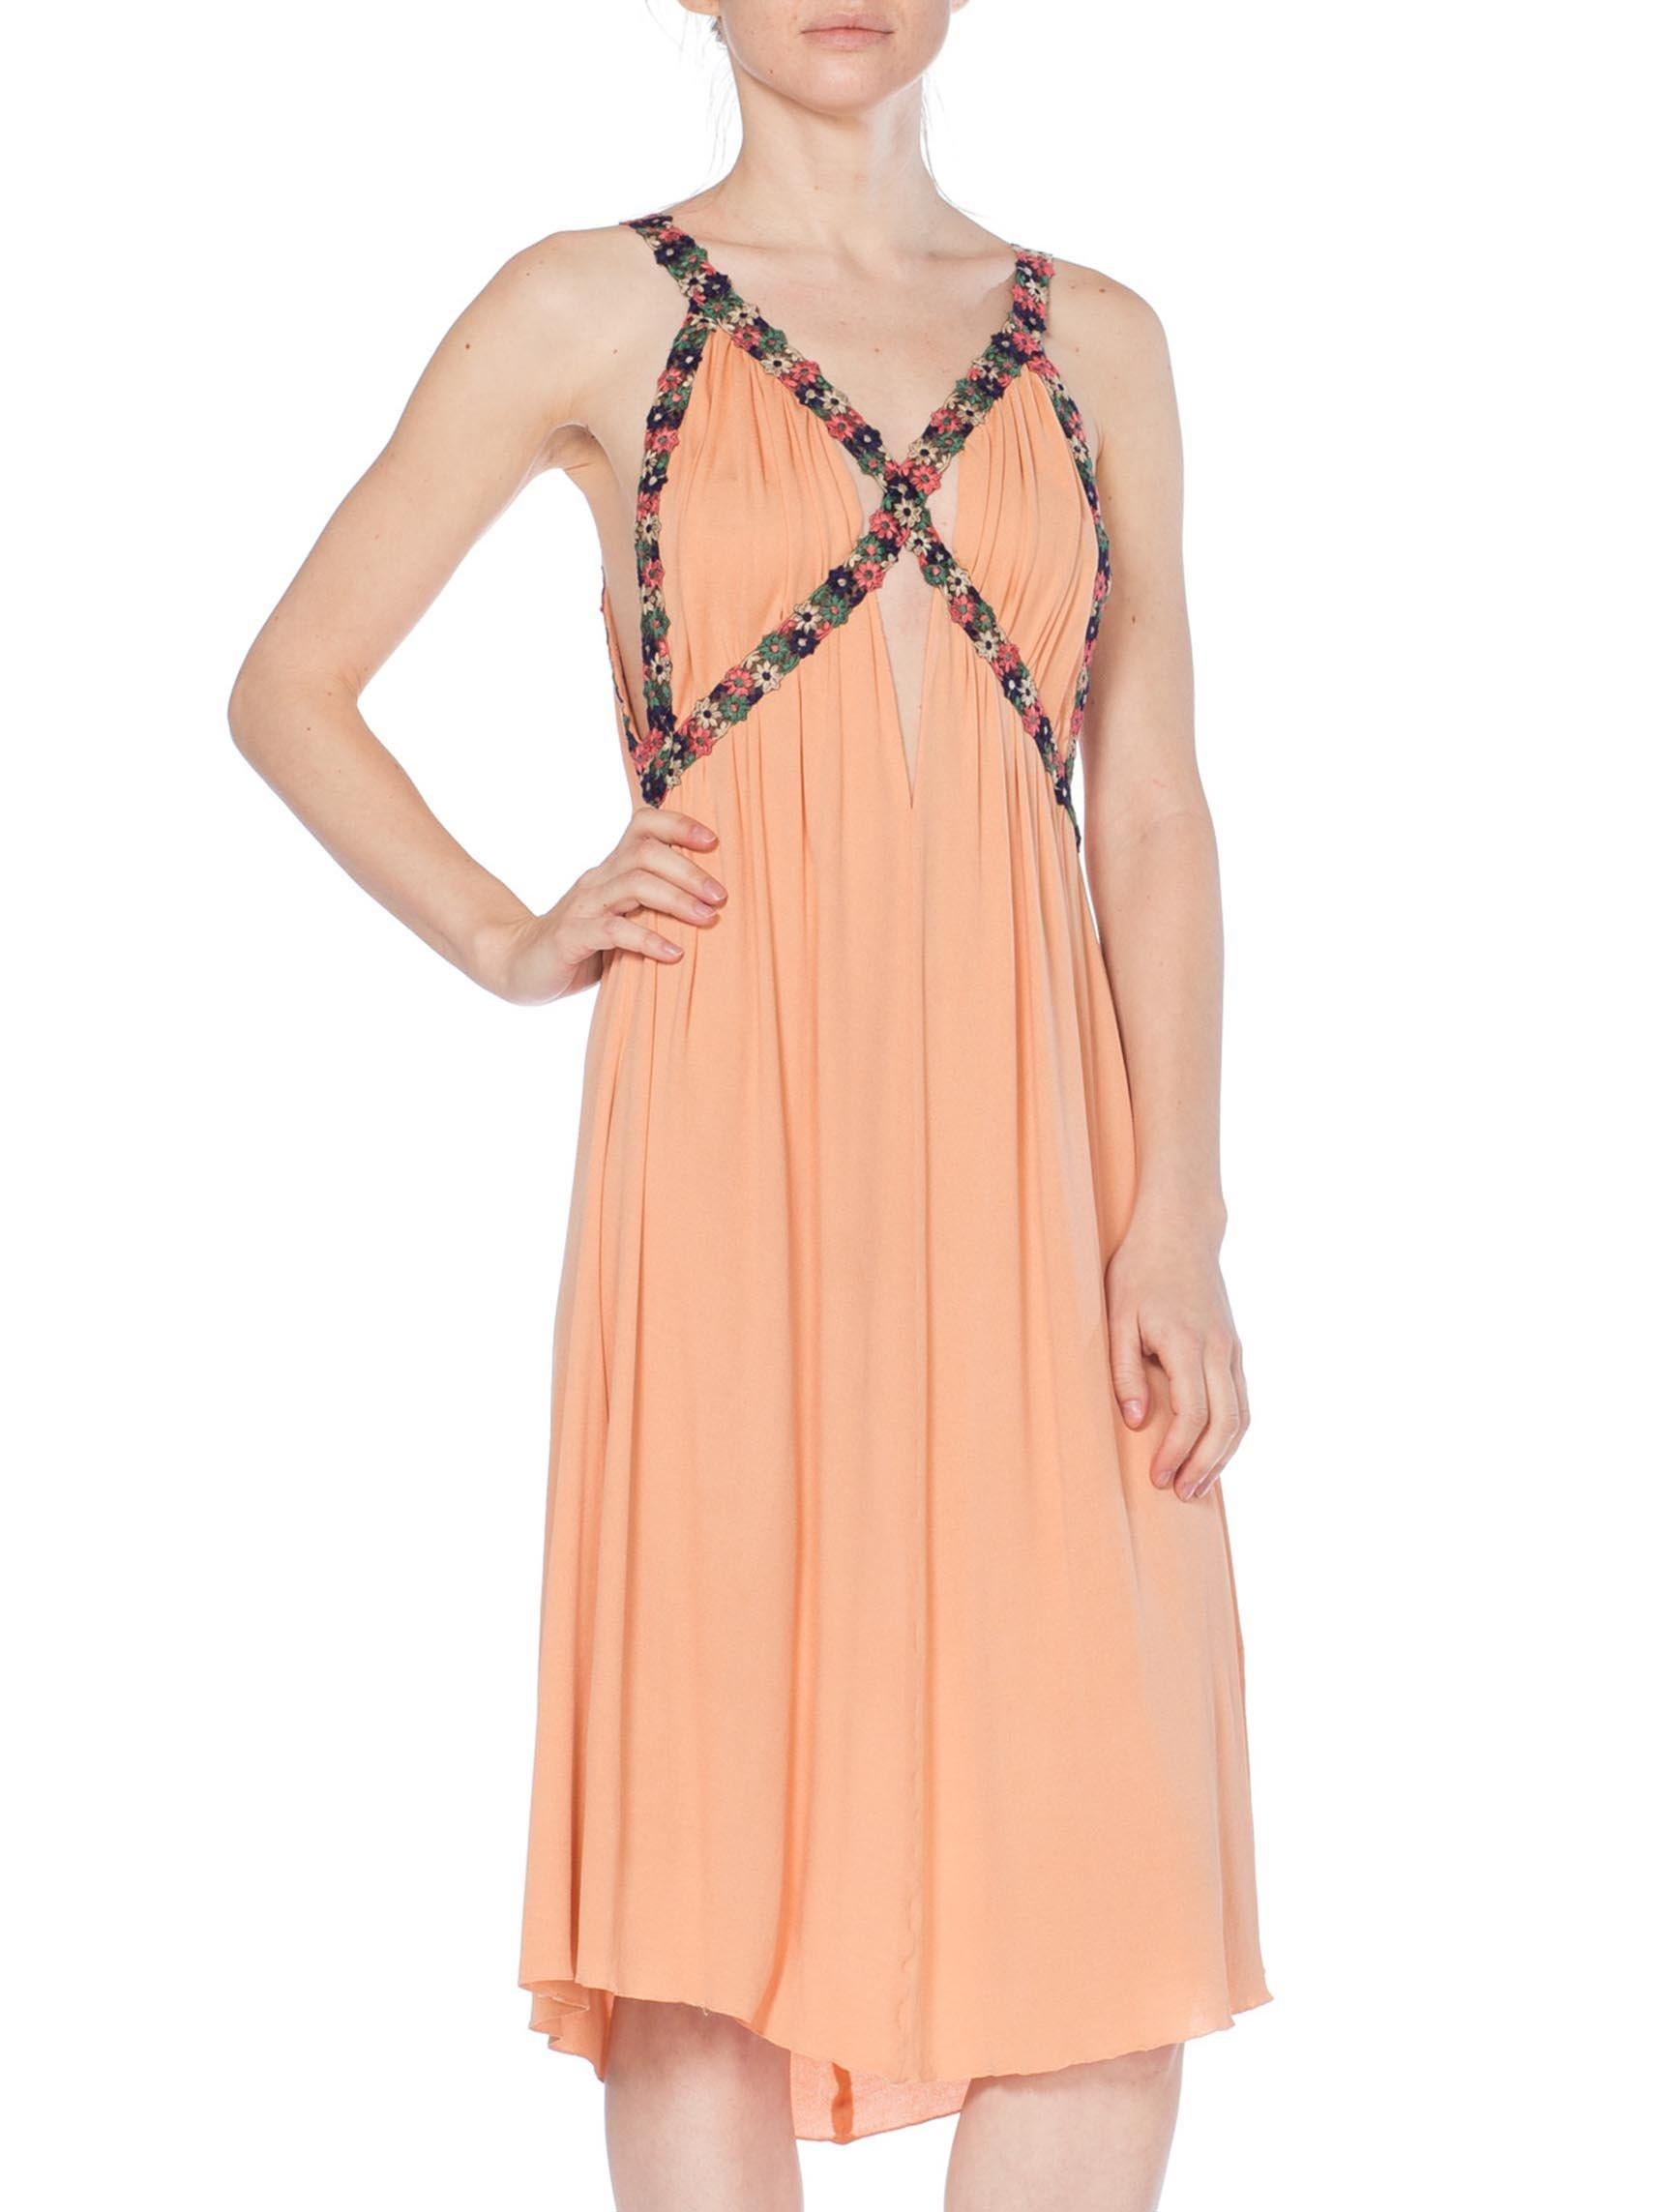 Women's MORPHEW COLLECTION Peach Silk Jersey Dress With Cutout Front & 1930S Floral Trim For Sale